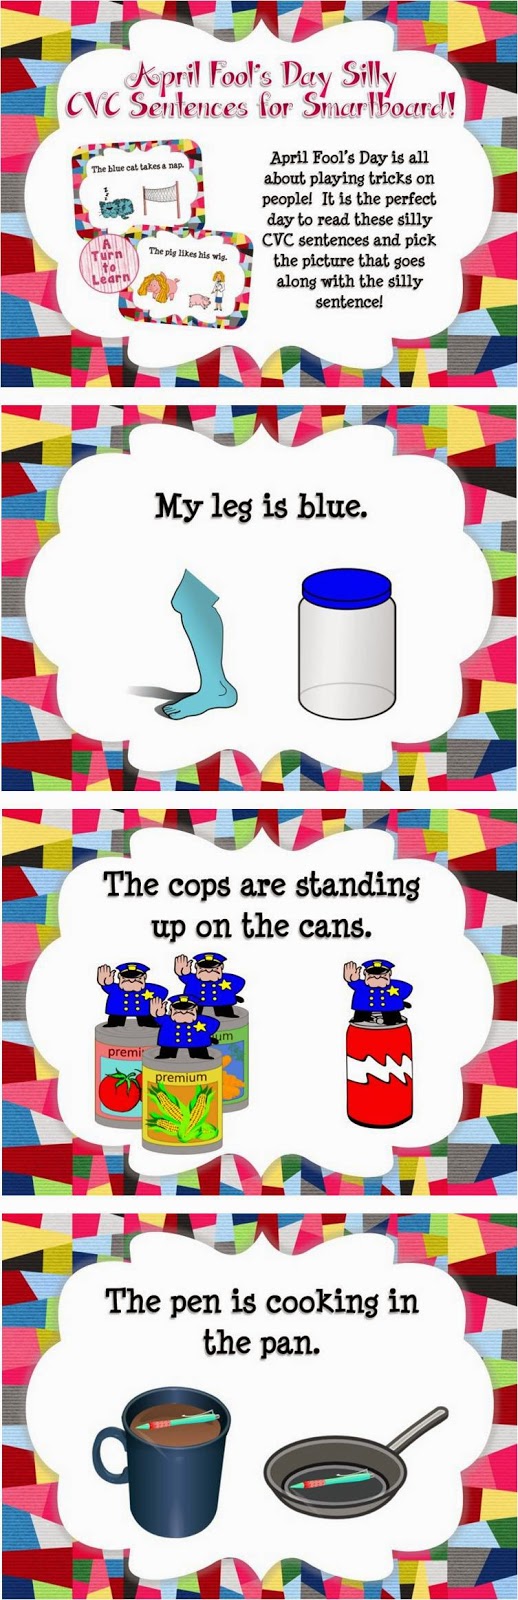  April Fool's Day Silly CVC Sentences (A No-Prep Game for the Smartboard!)